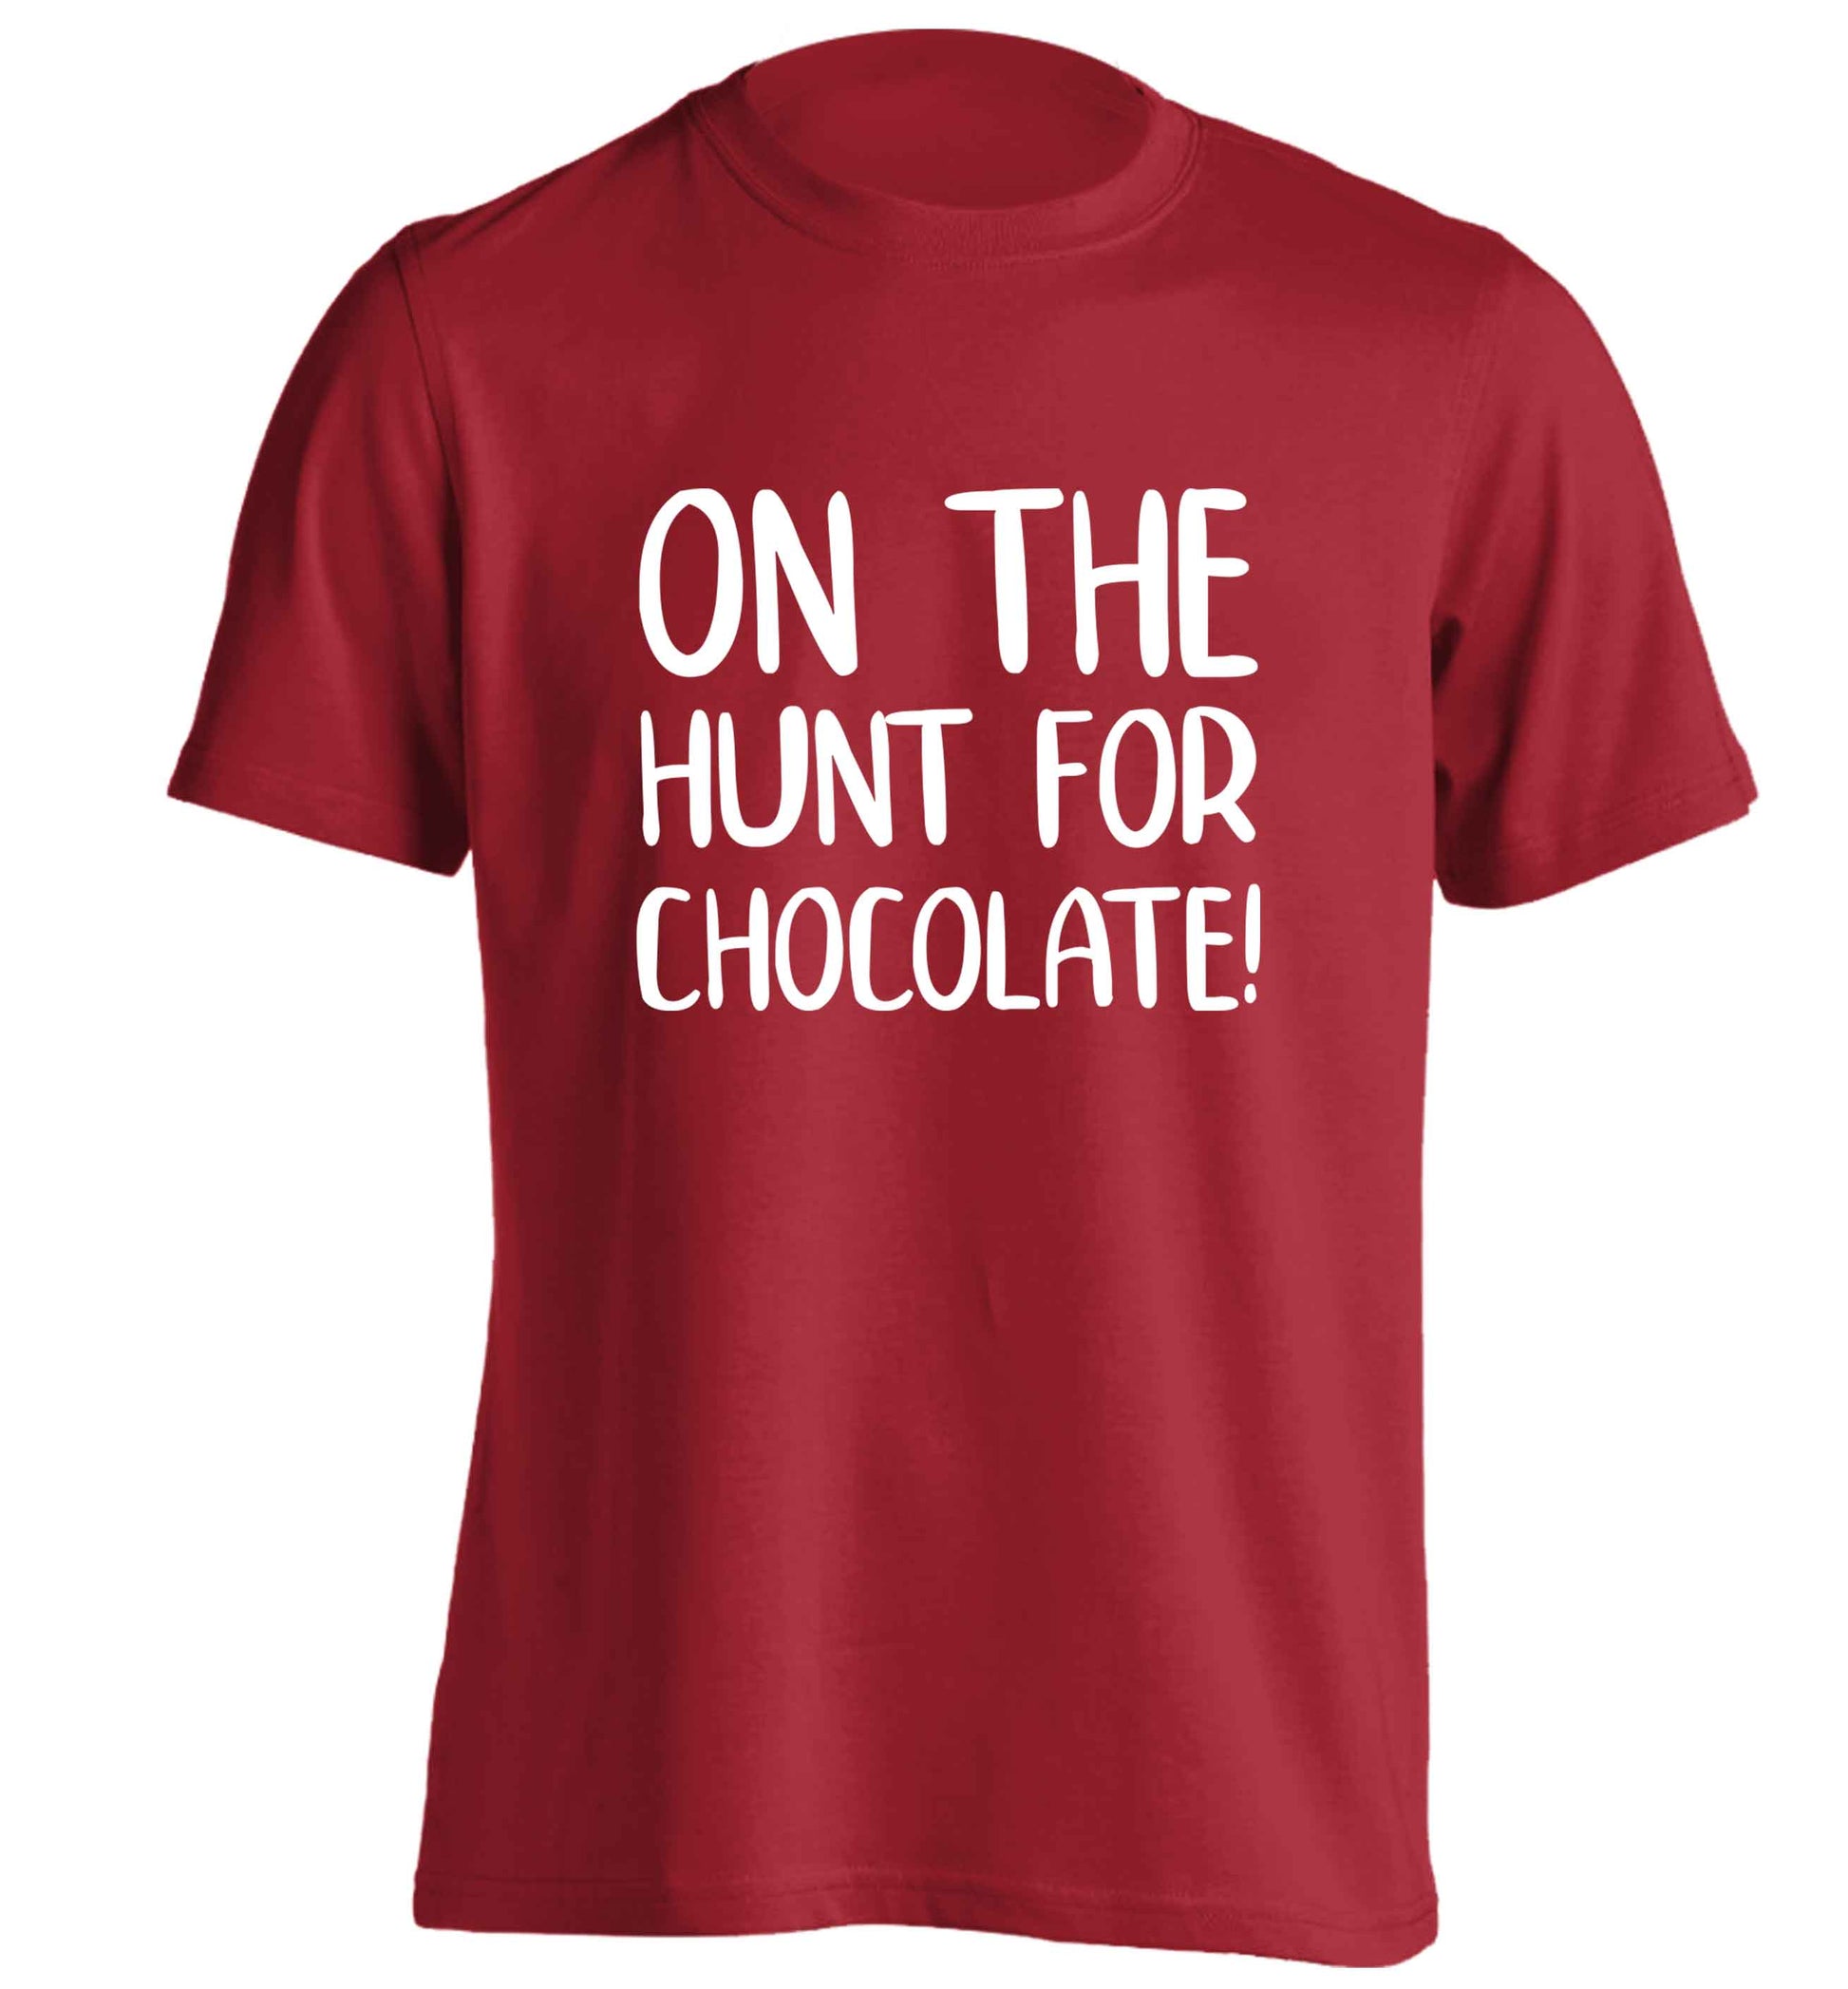 On the hunt for chocolate! adults unisex red Tshirt 2XL